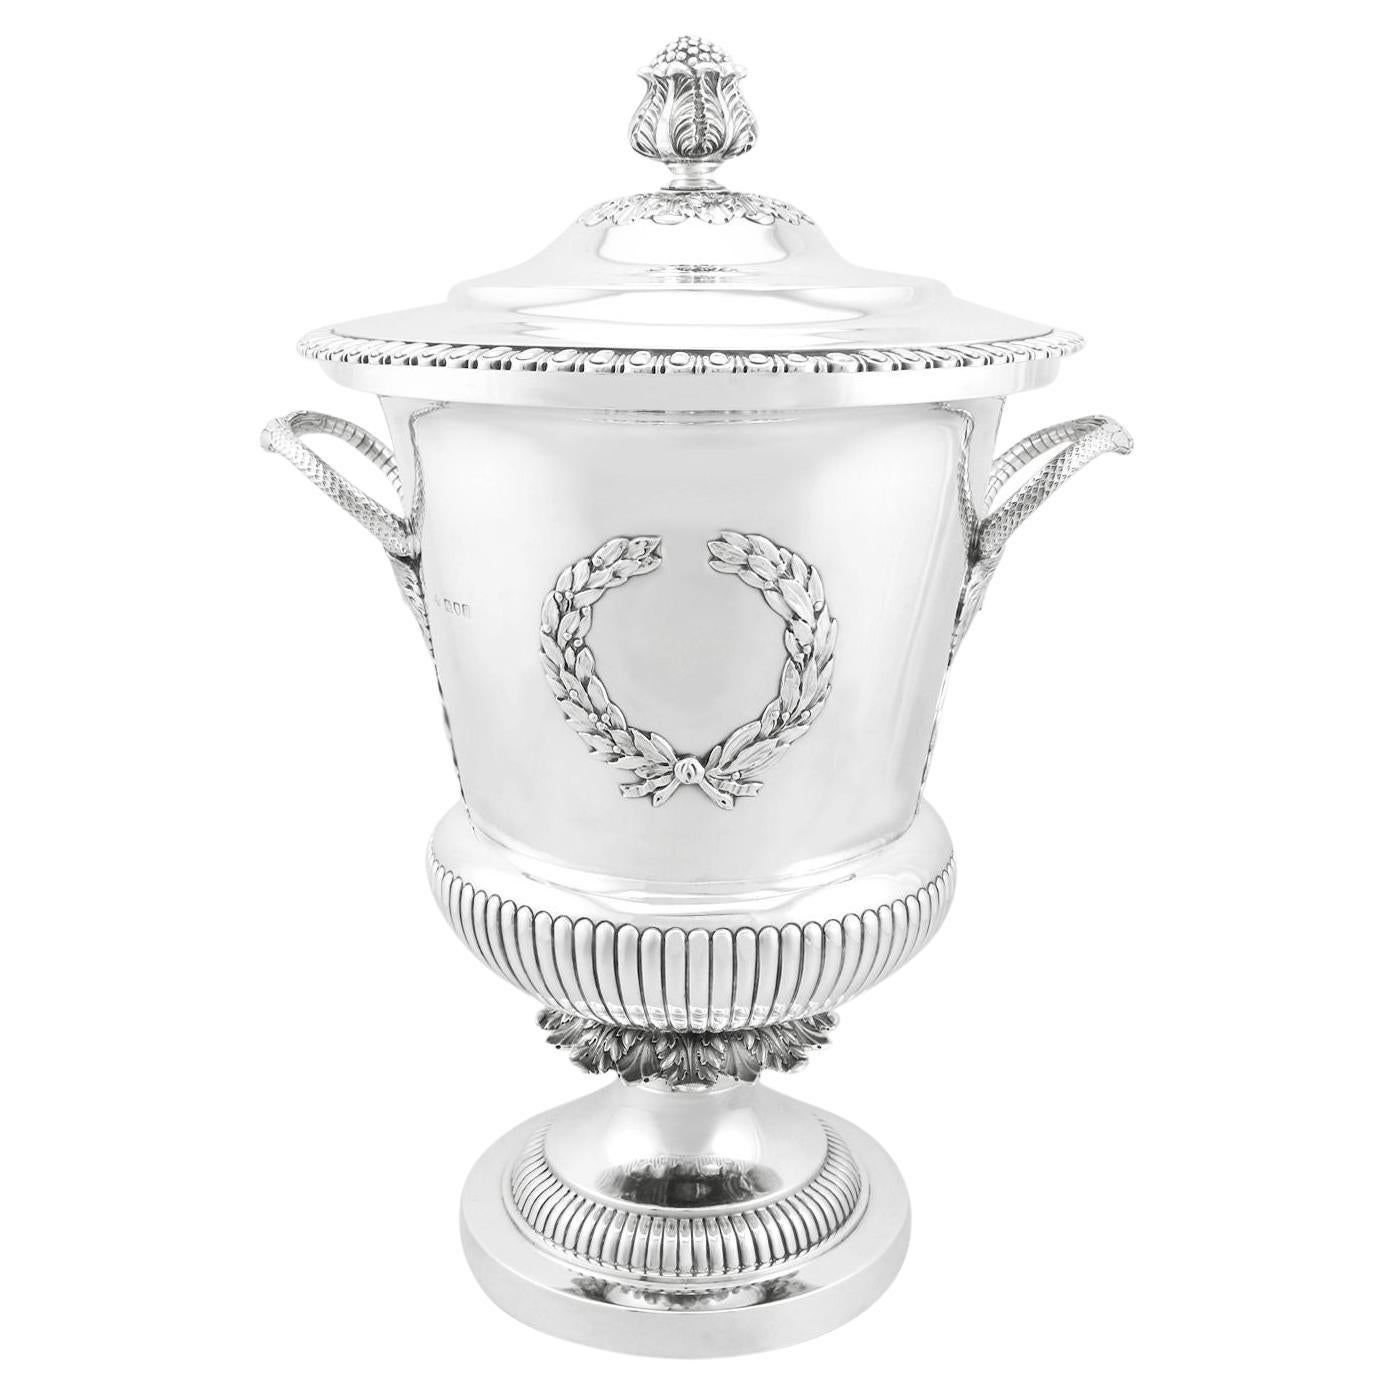 1900s Edwardian Sterling Silver Presentation Cup and Cover